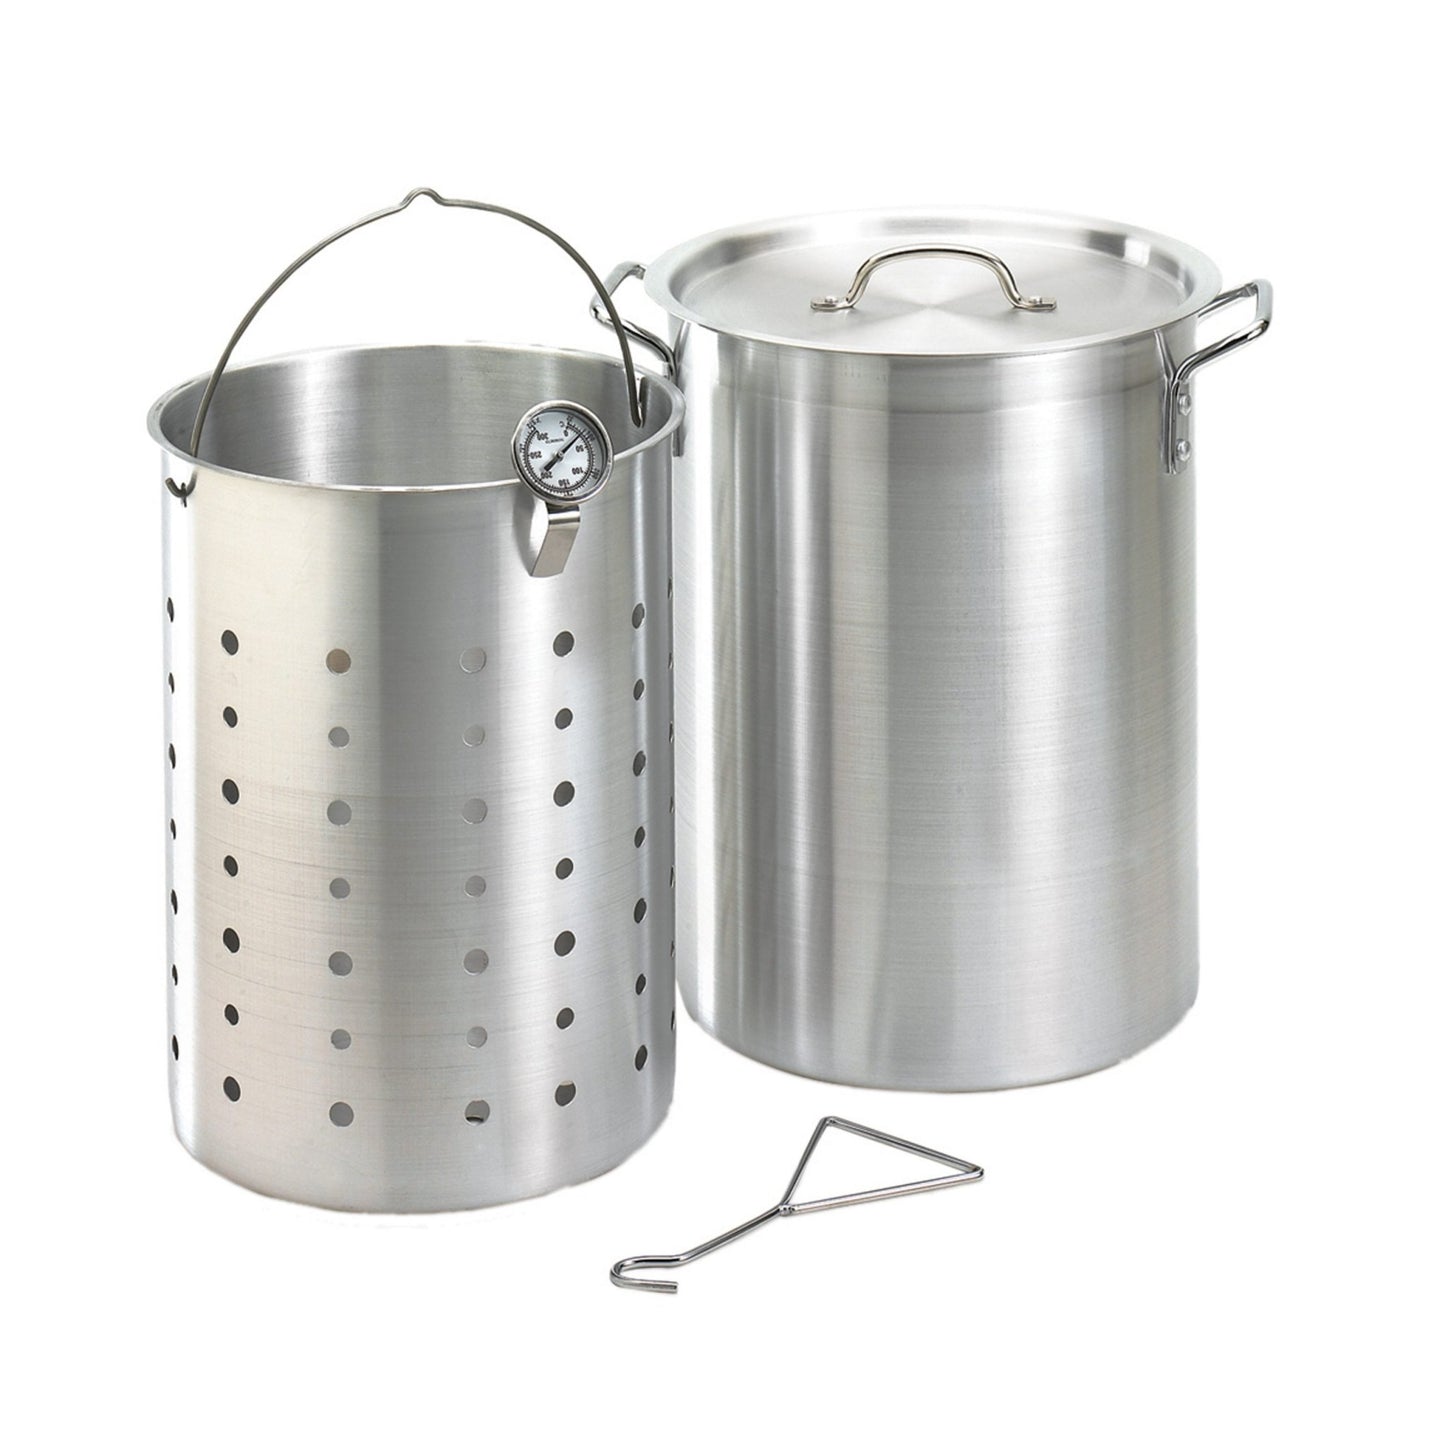 Fire Magic Turkey Fryer Kit Aluminum with Basket and Thermometer - grillsNmore.com